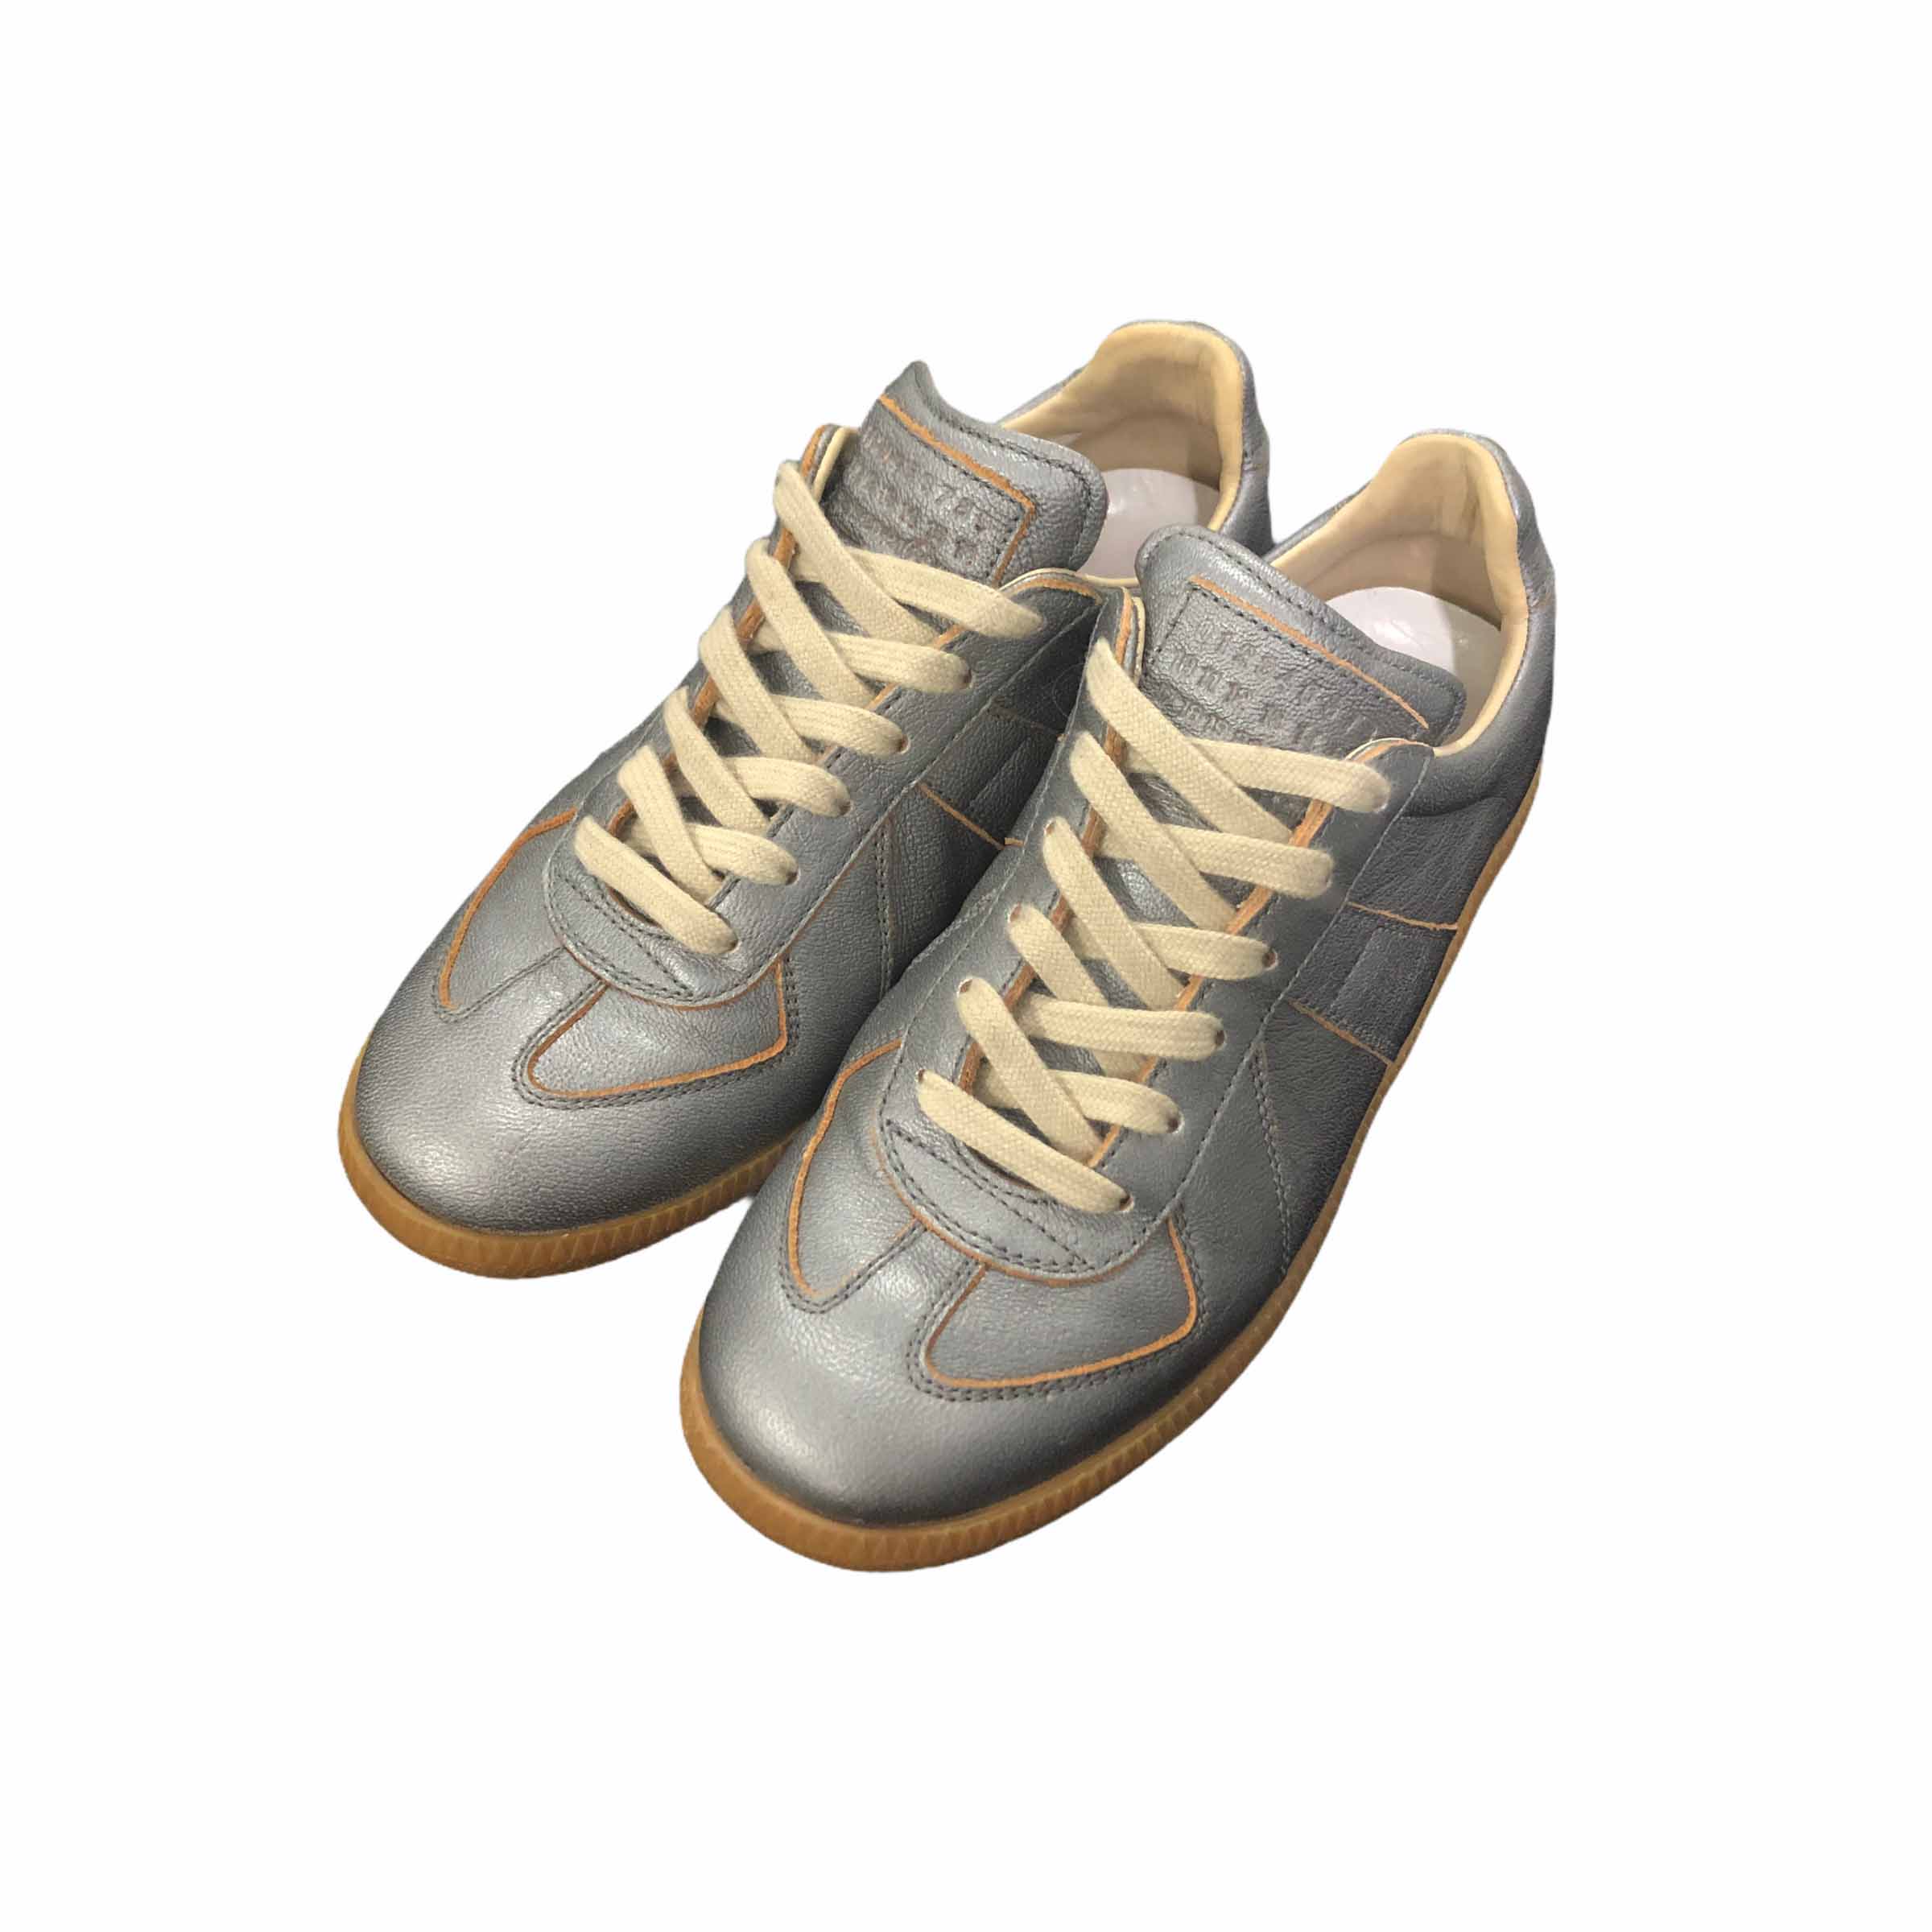 [Margiela] Silver Plated Sneakers - Size 36 1/2